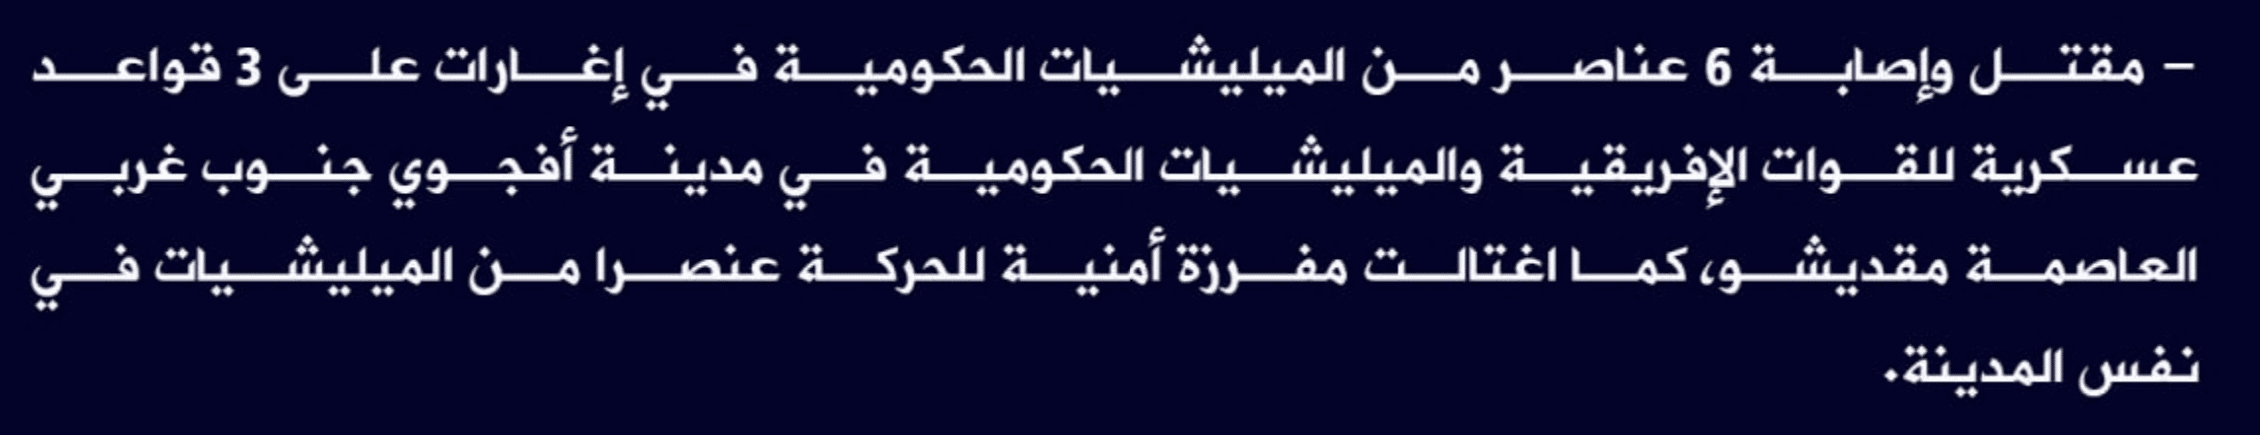 (Claim) al-Shabaab Killed and Injured Six Somalian Forces in Attacks on Three African and Somalian Forces in Addition to Assassinating a Soamlian Element in Afgoyee City, Mogadishu, Somalia - 26 December 2022